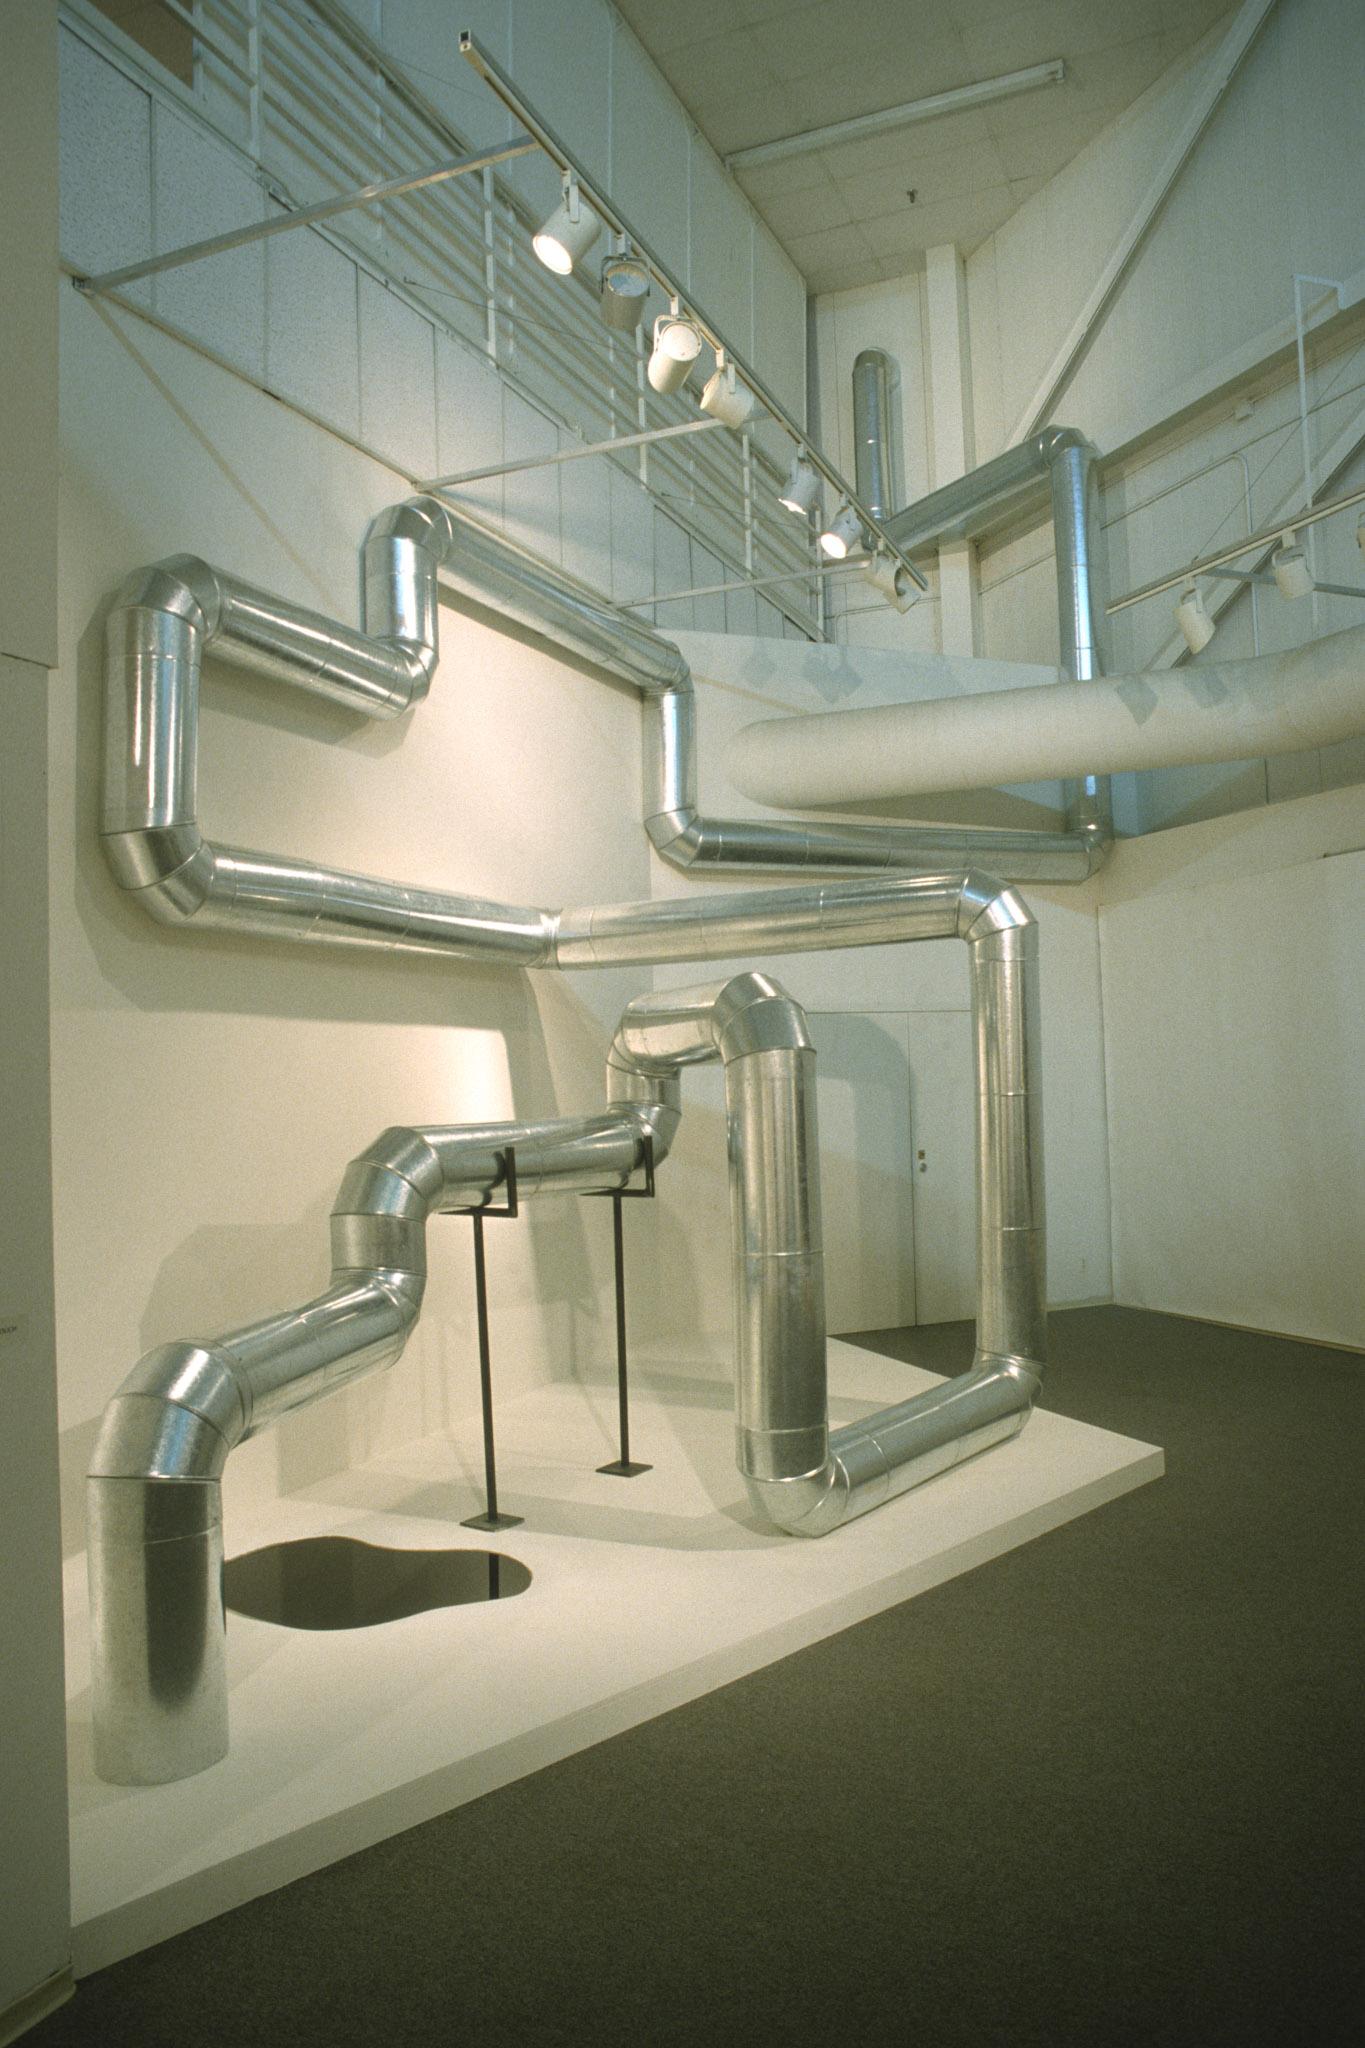 steel duct zig zags through the air and along the walls inside a white gallery space. A small puddle of oil has pooled on the floor.